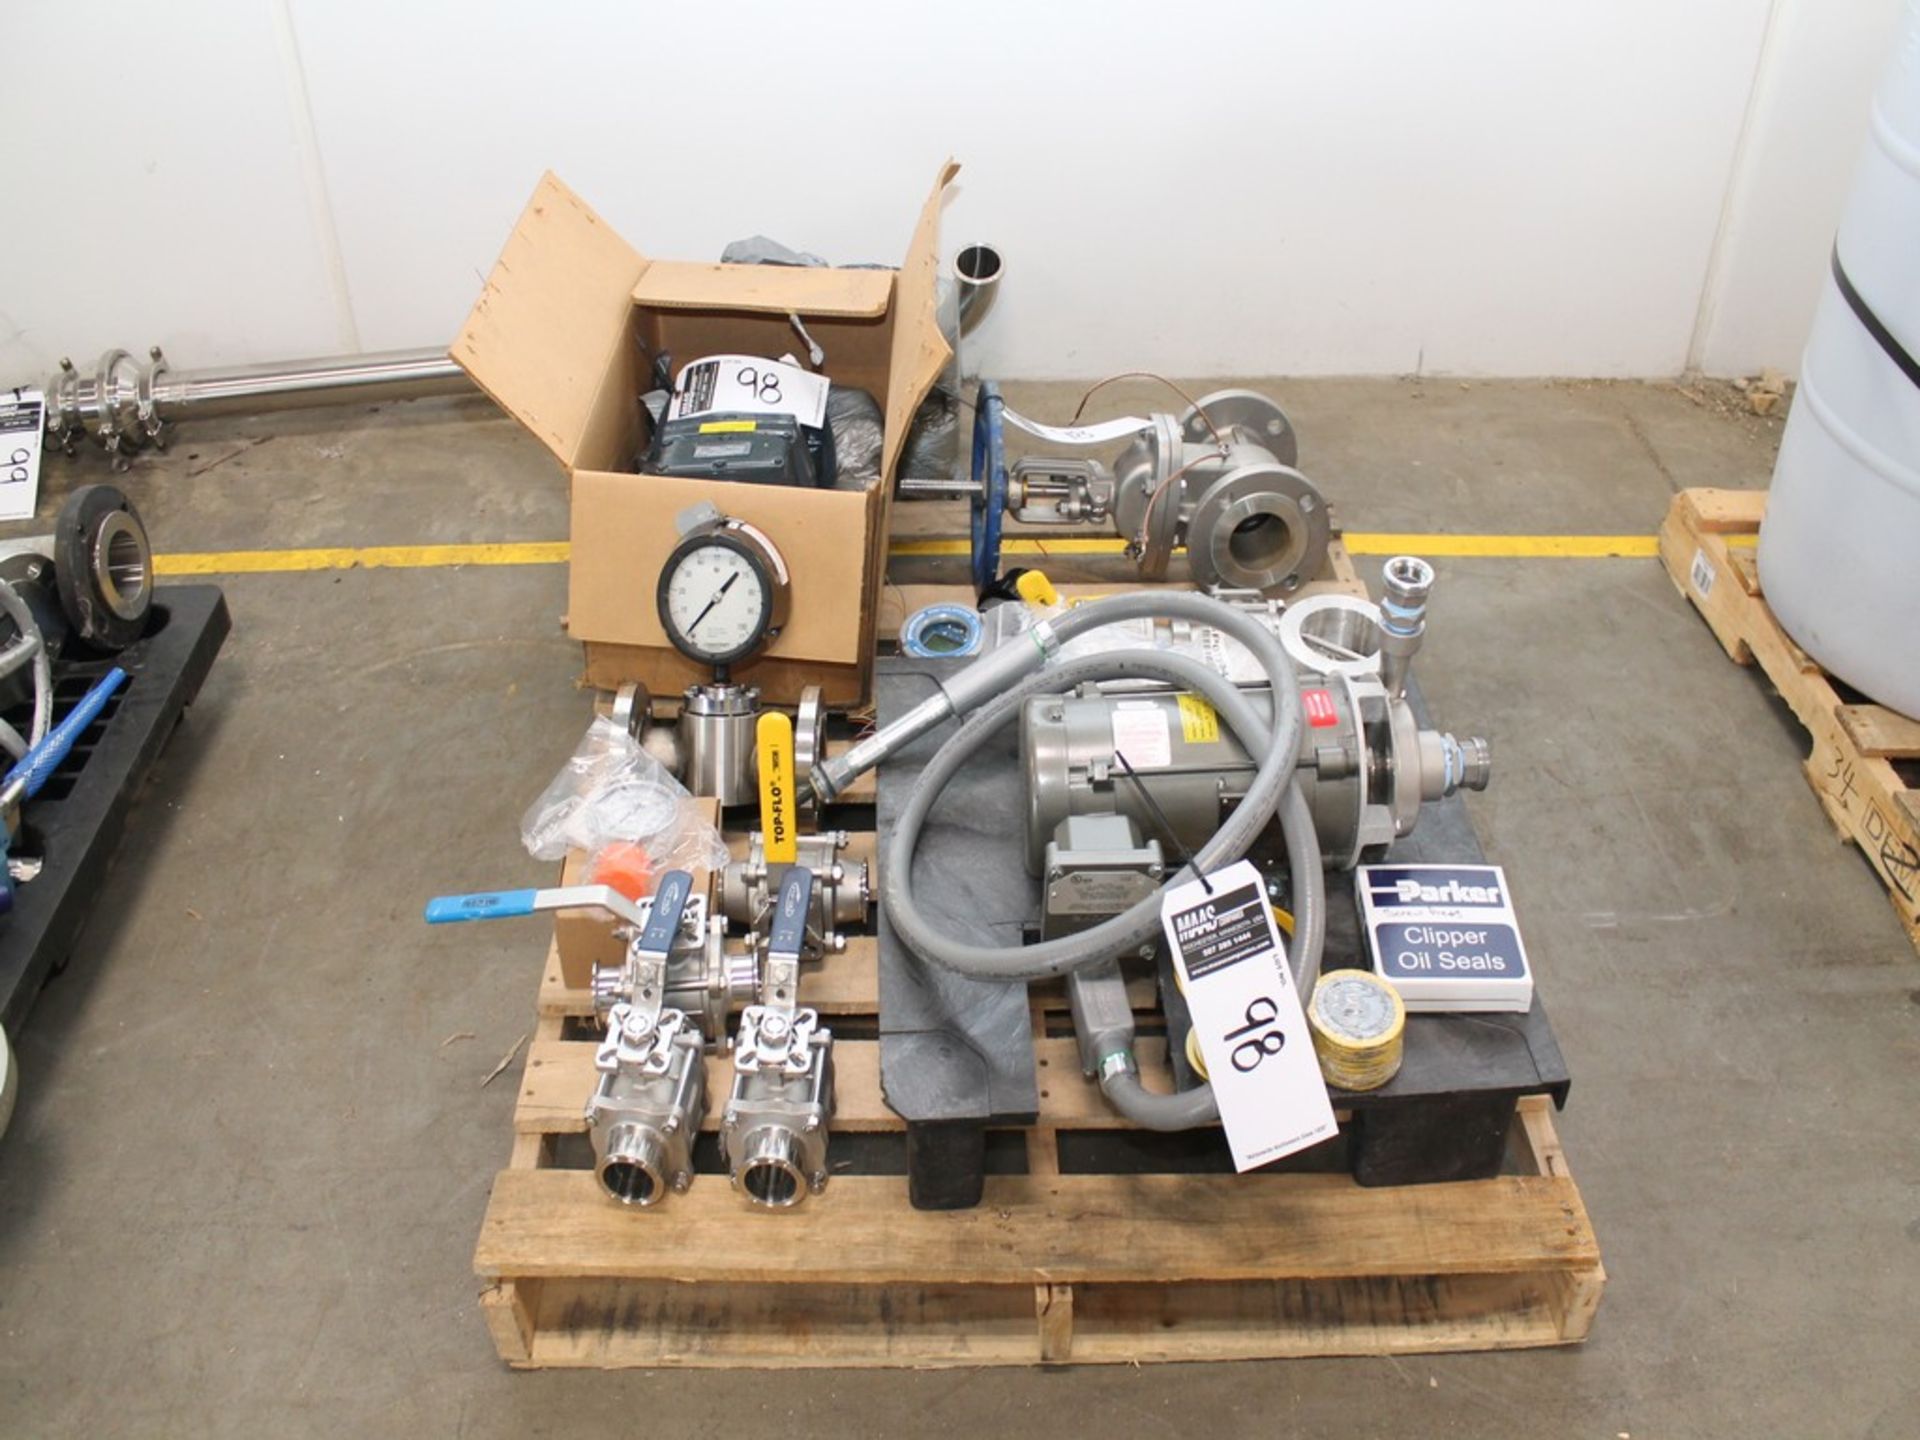 LOT CONTENTS OF PALLET WITH MISCELLANEOUS PUMPS, GAUGES, VALVES, METERS - Image 2 of 12